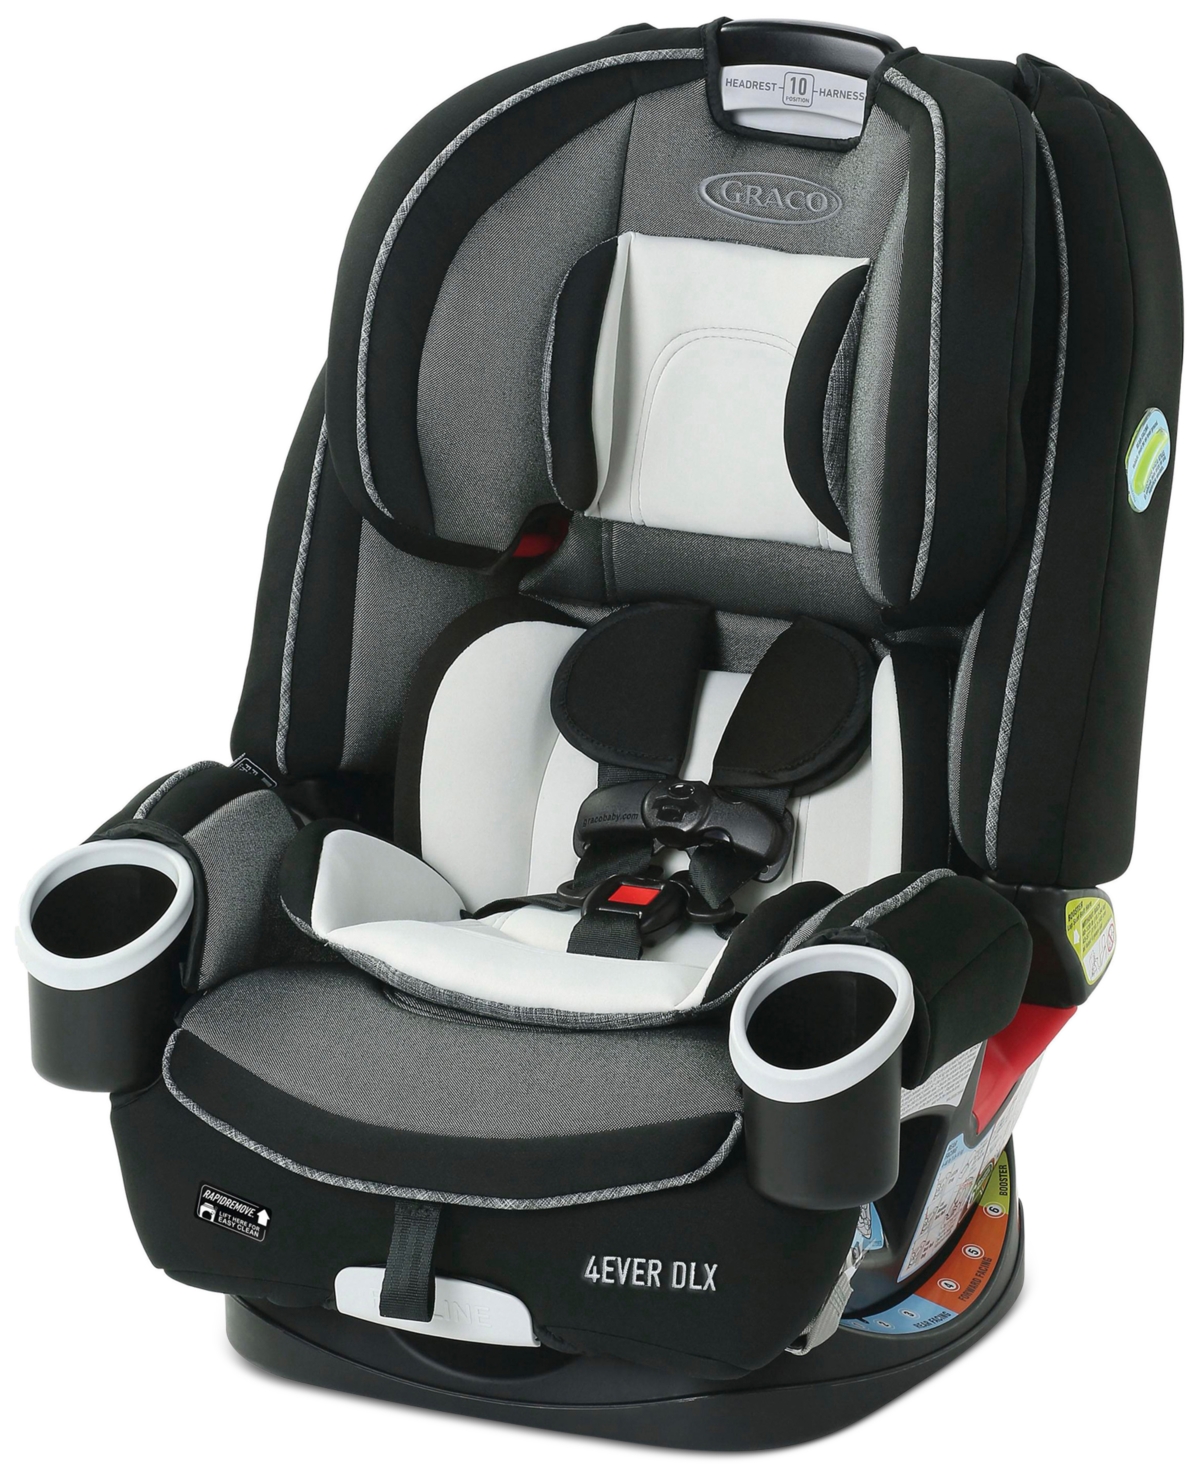 Graco Babies' 4ever Dlx 4-in-1 Car Seat In Black,white